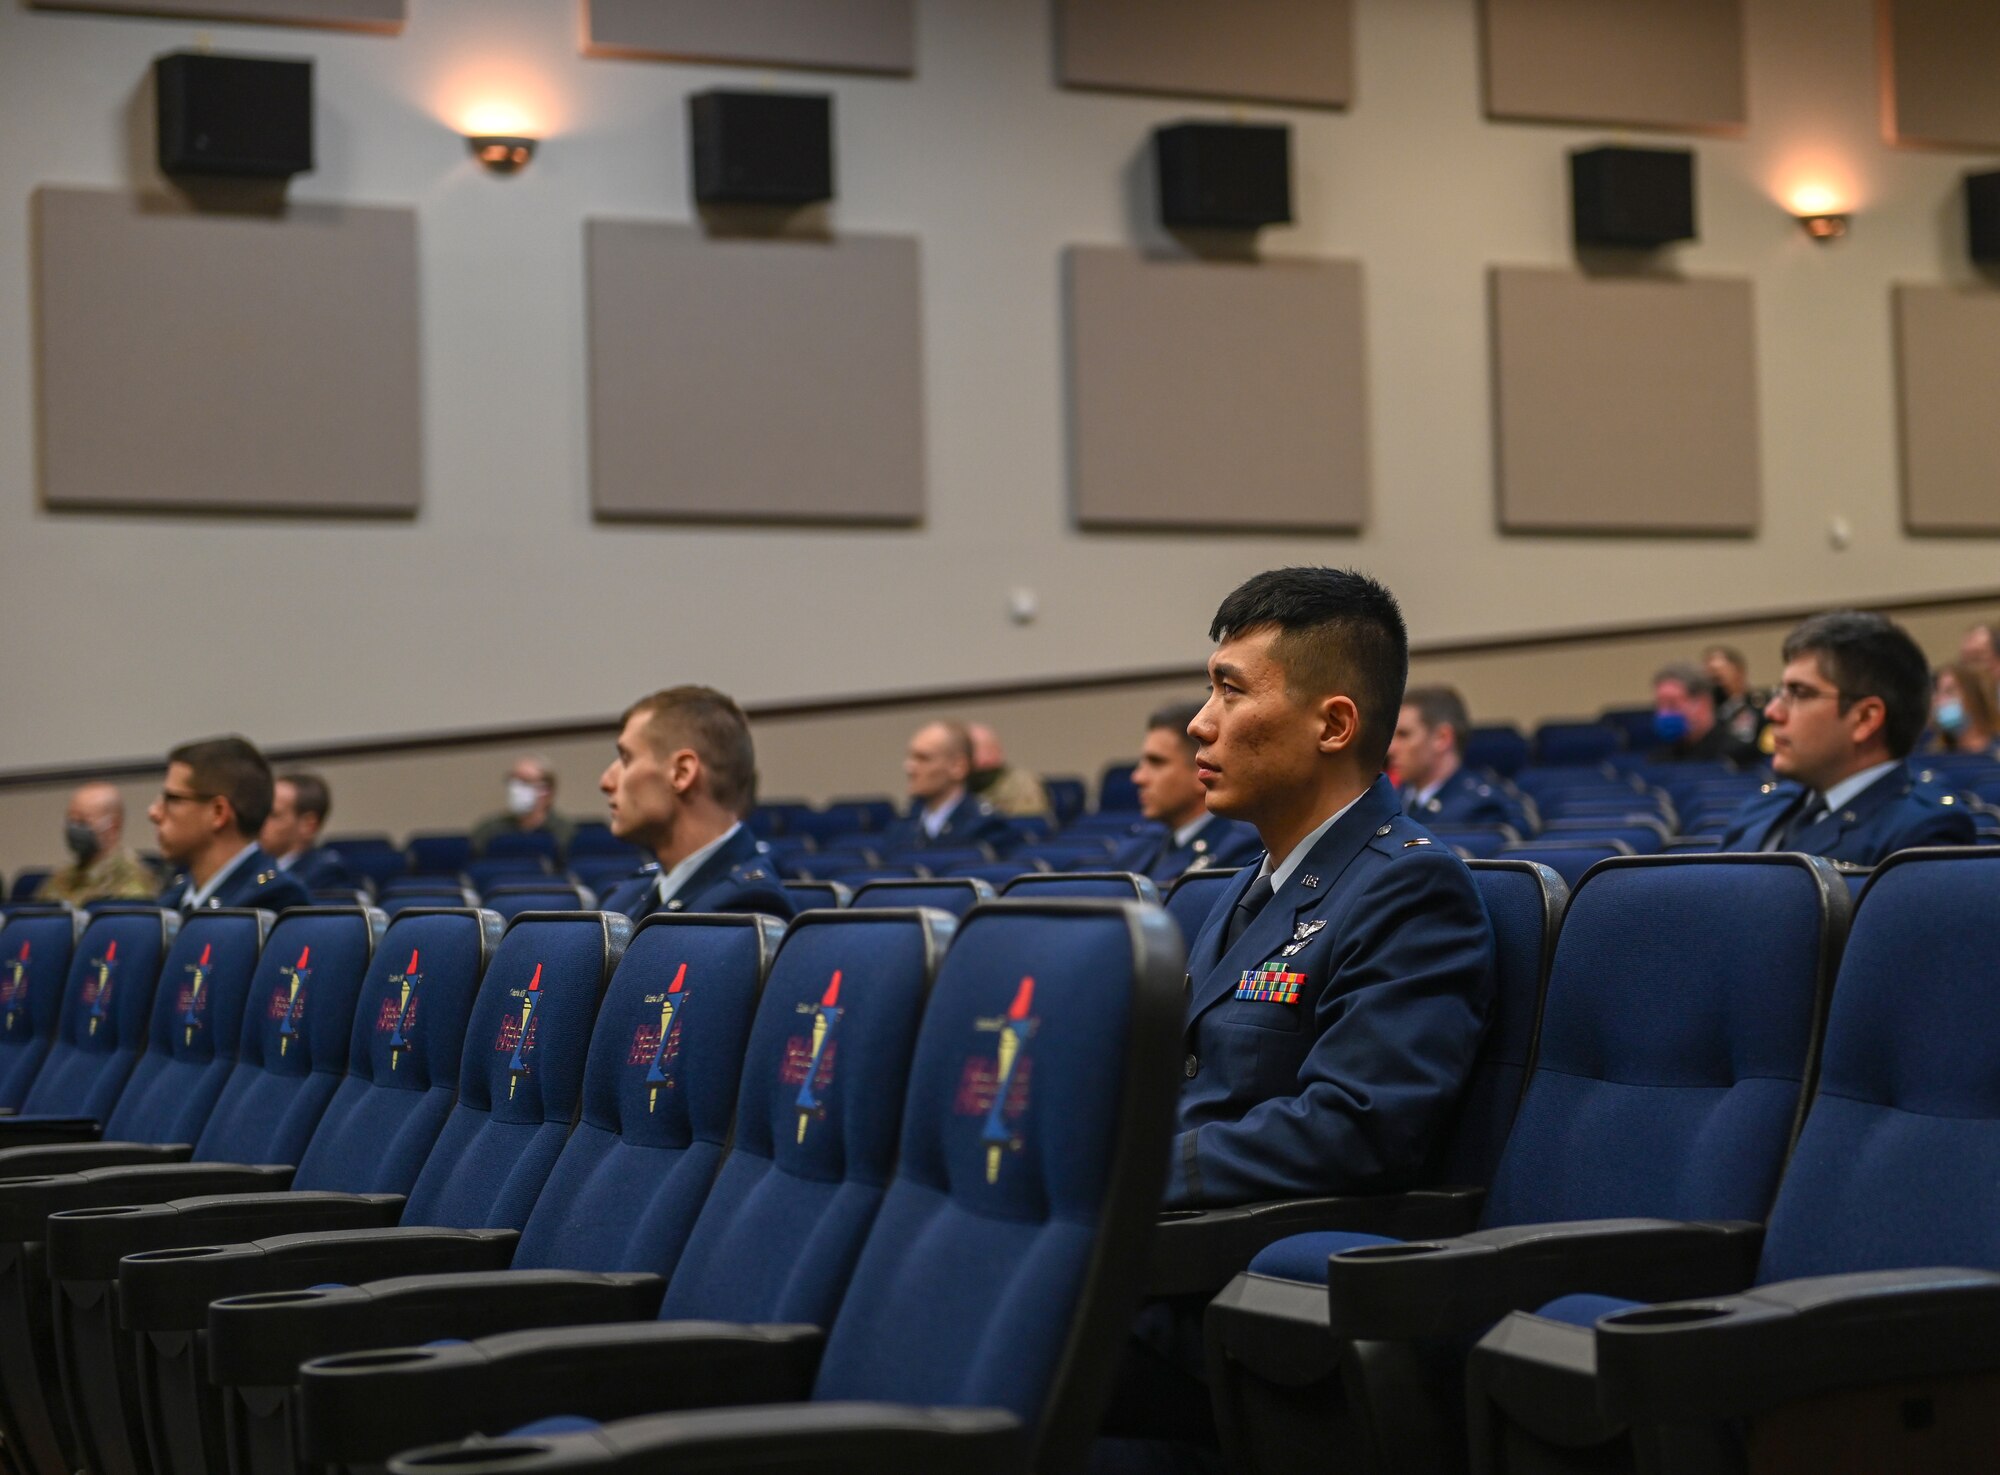 Specialized Undergraduate Pilot Training Class 21-03 sit at their graduation ceremony on Dec. 11, 2020, at Columbus Air Force Base, Miss. Students will conduct pilot training for at least a year before graduating from SUPT. (U.S. Air Force photo by Airman 1st Class Davis Donaldson)